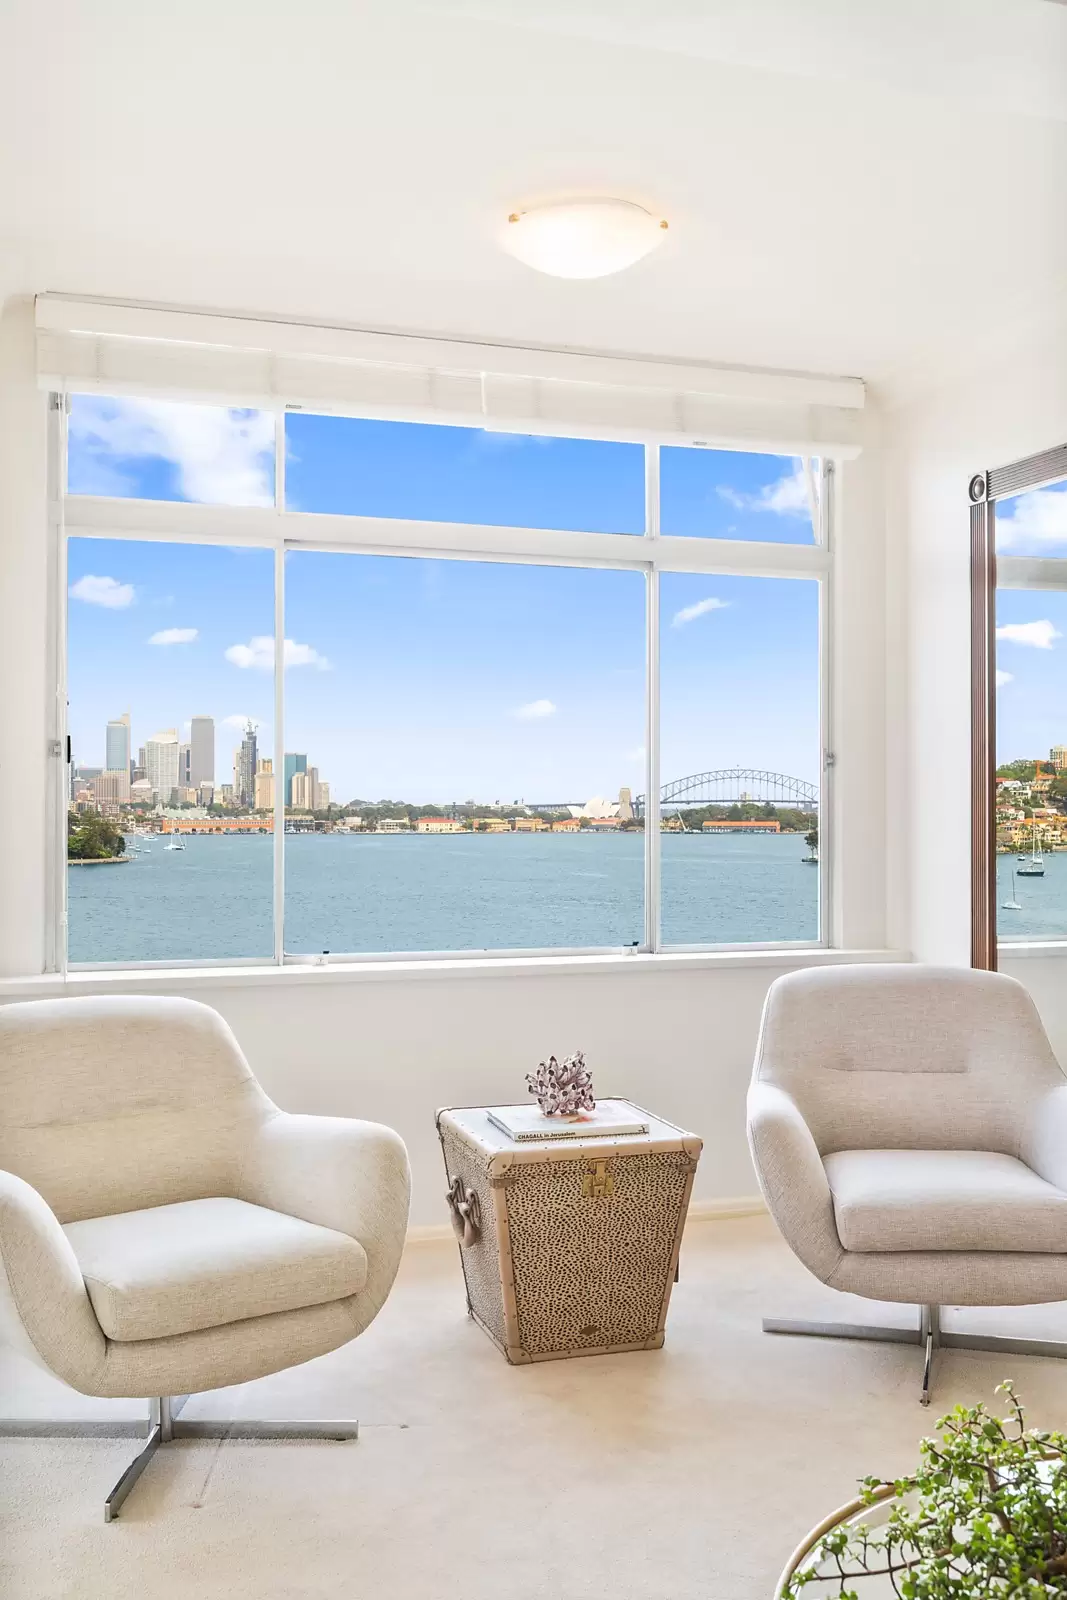 Photo #4: 10/78 Wolseley Road, Point Piper - Sold by Sydney Sotheby's International Realty